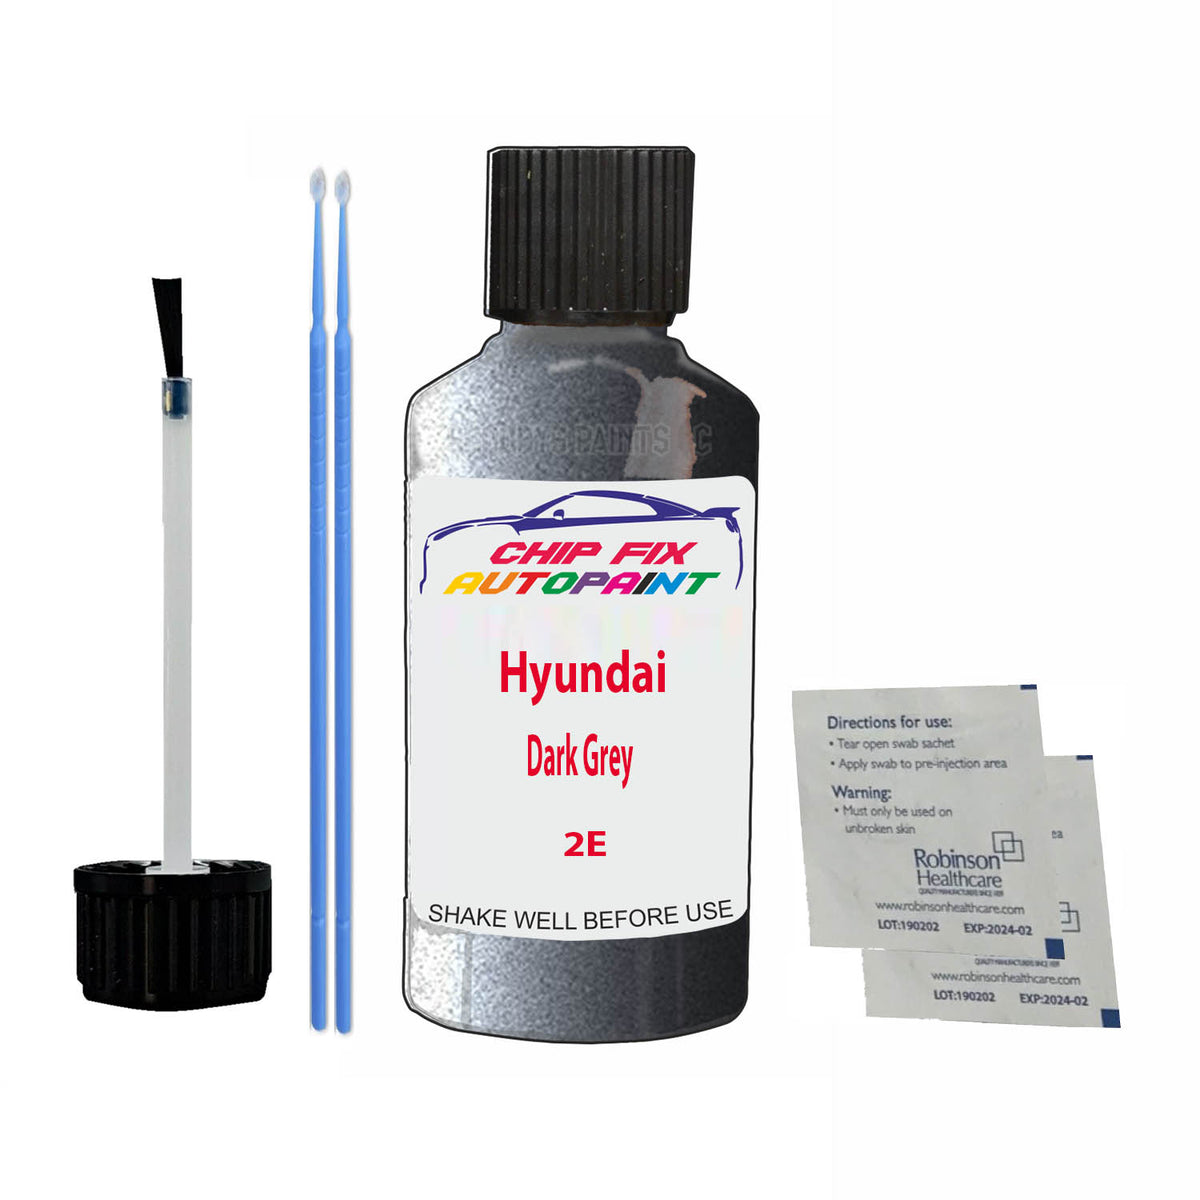 FOR Hyundai Dark Grey Touch Up Paint Code 2E Scratch Repair Kit